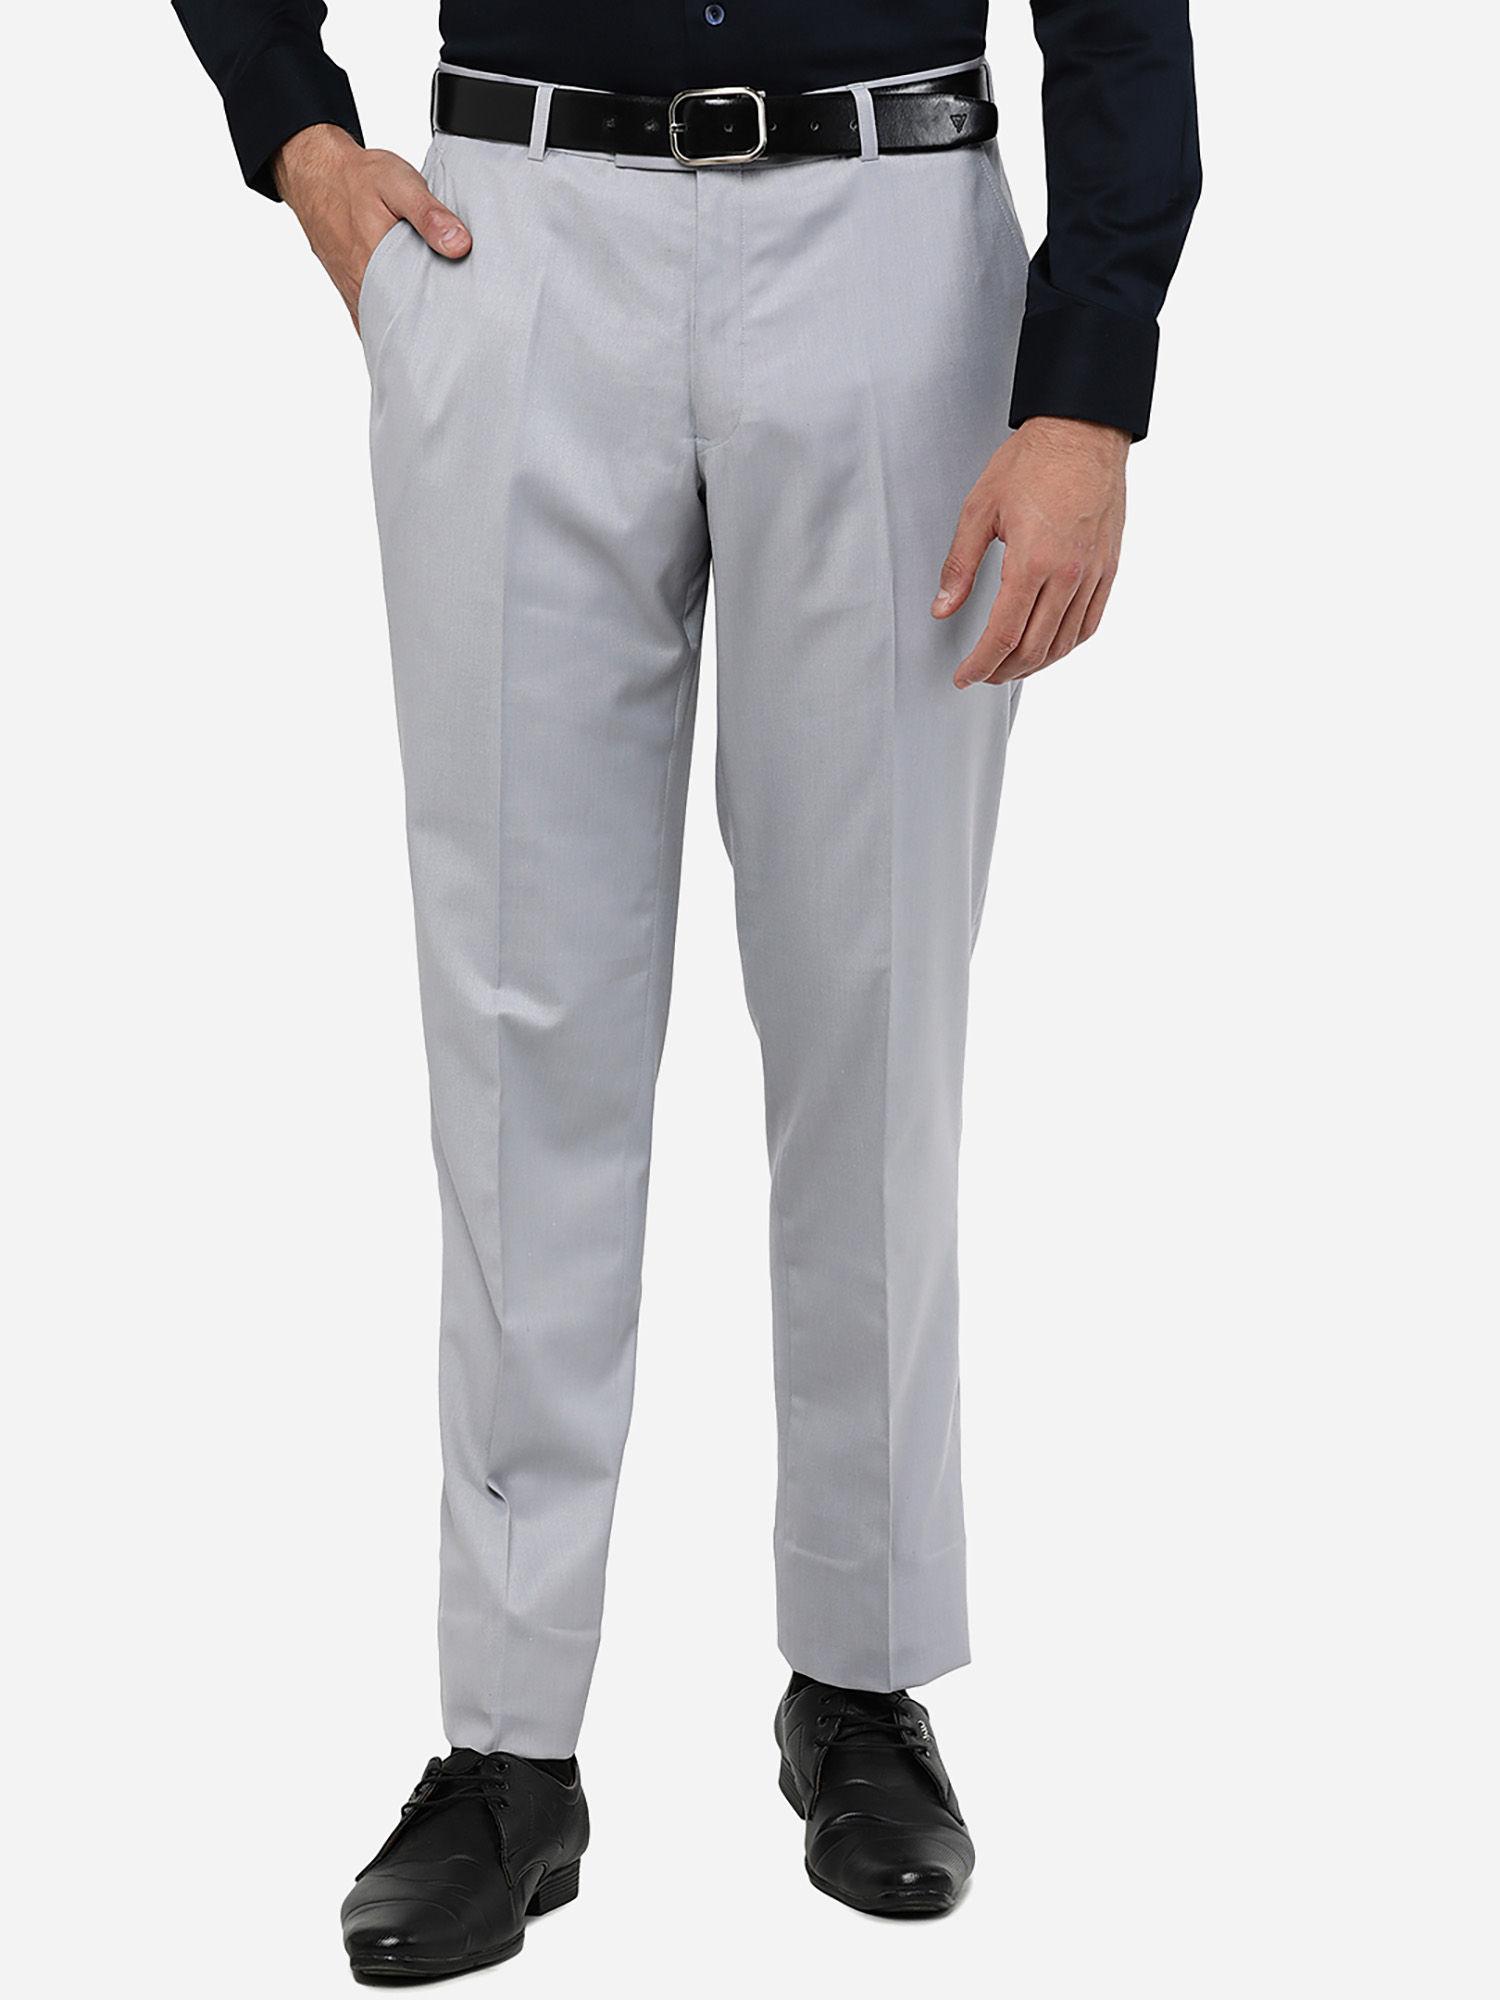 men's solid light grey terry rayon classic fit formal trouser